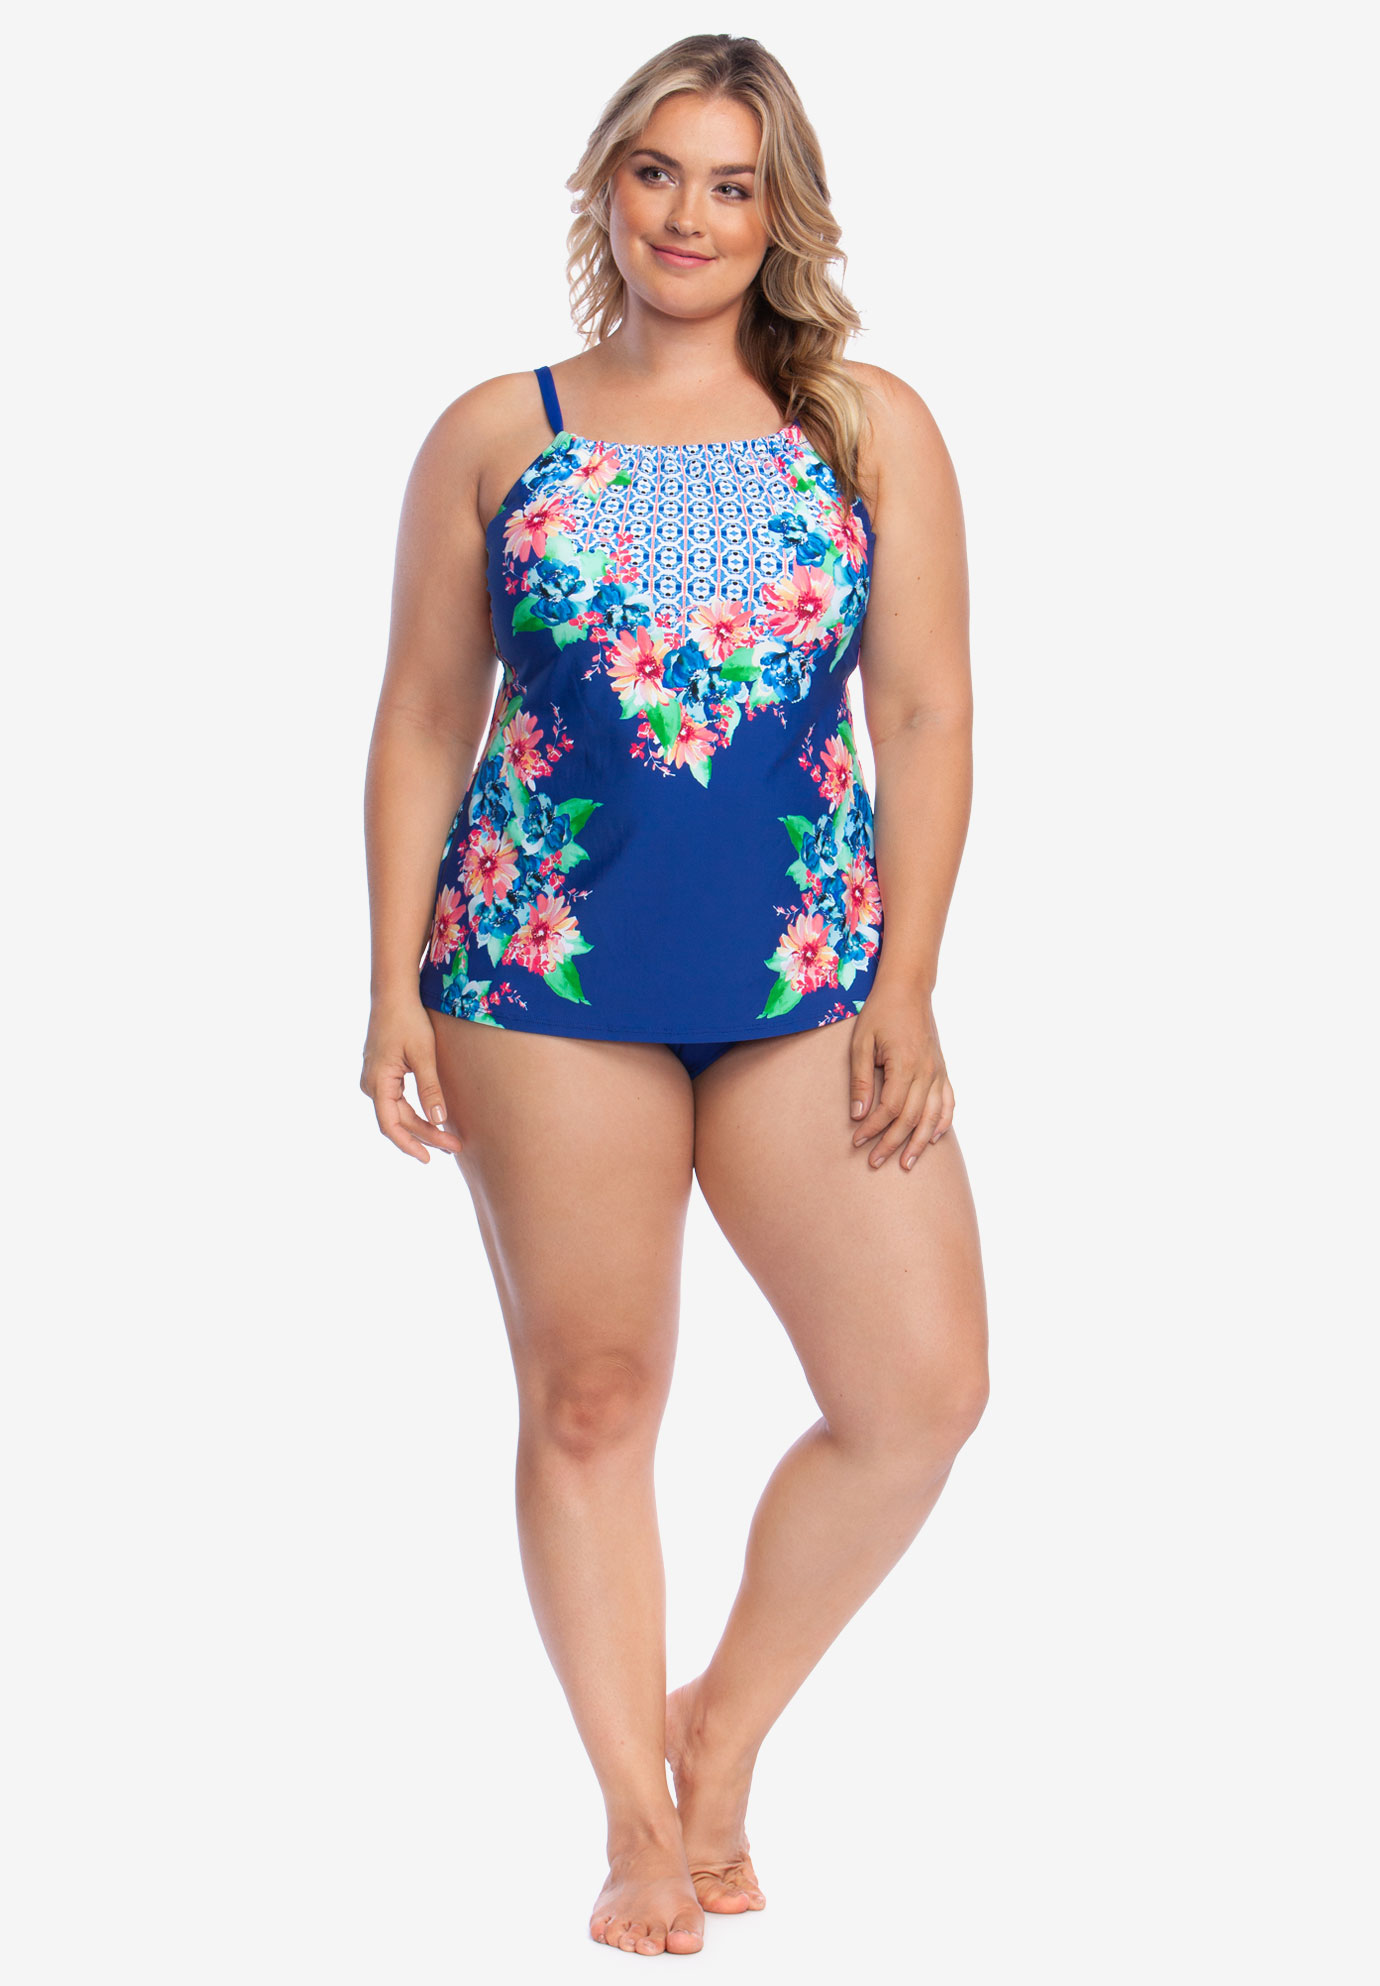 High Neck Tankini Top By 24thandocean Plus Size Tankinis And Bikinis Full Beauty